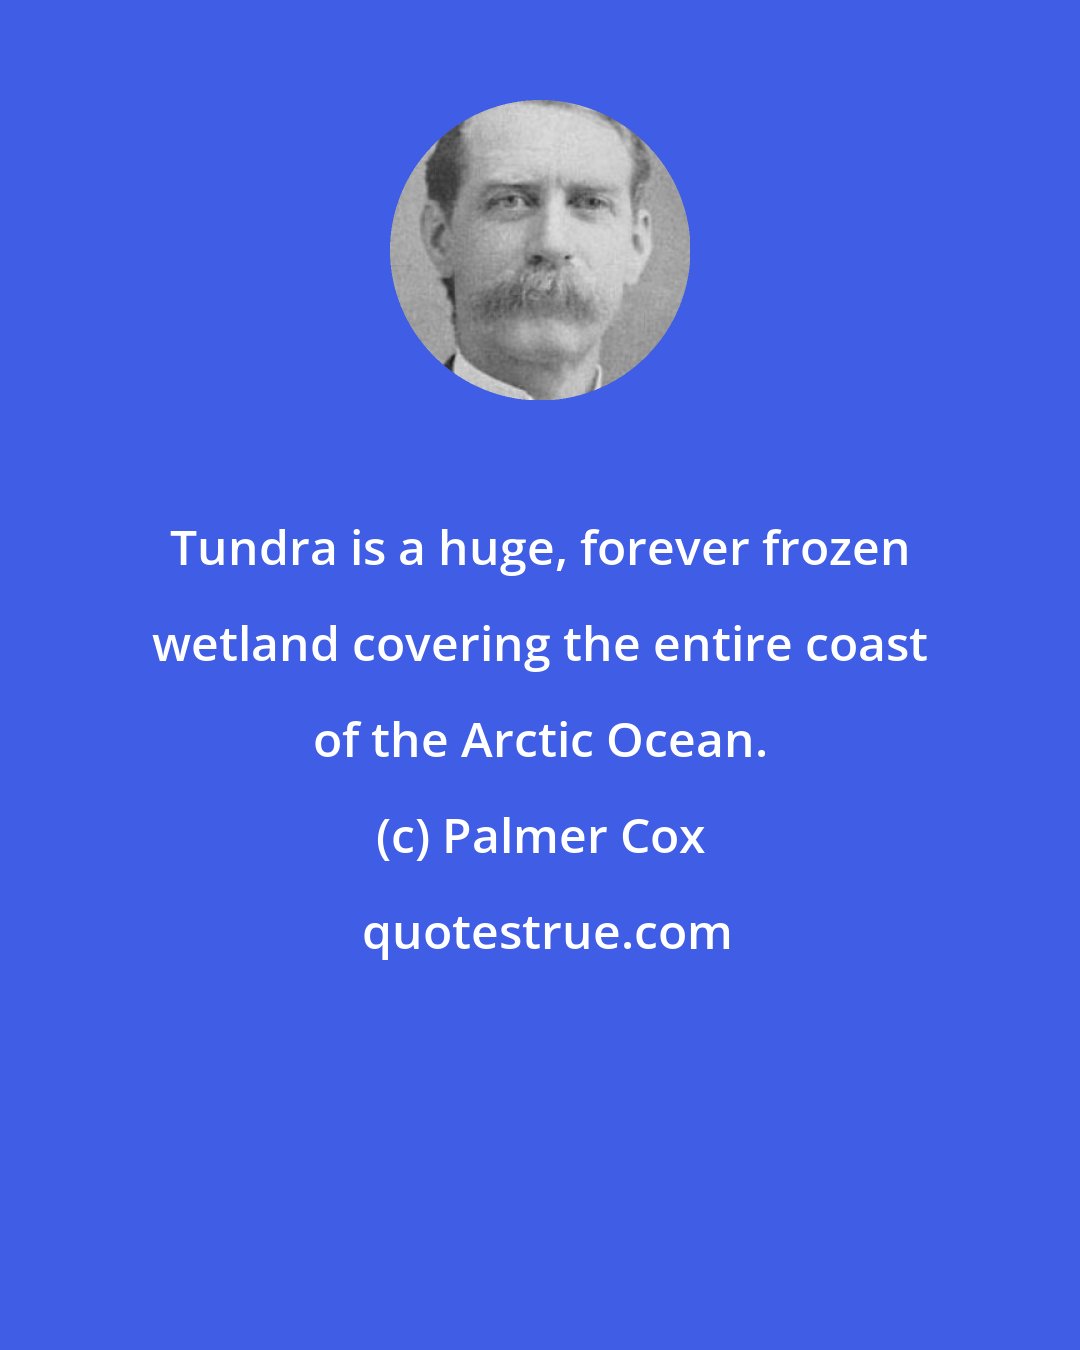 Palmer Cox: Tundra is a huge, forever frozen wetland covering the entire coast of the Arctic Ocean.